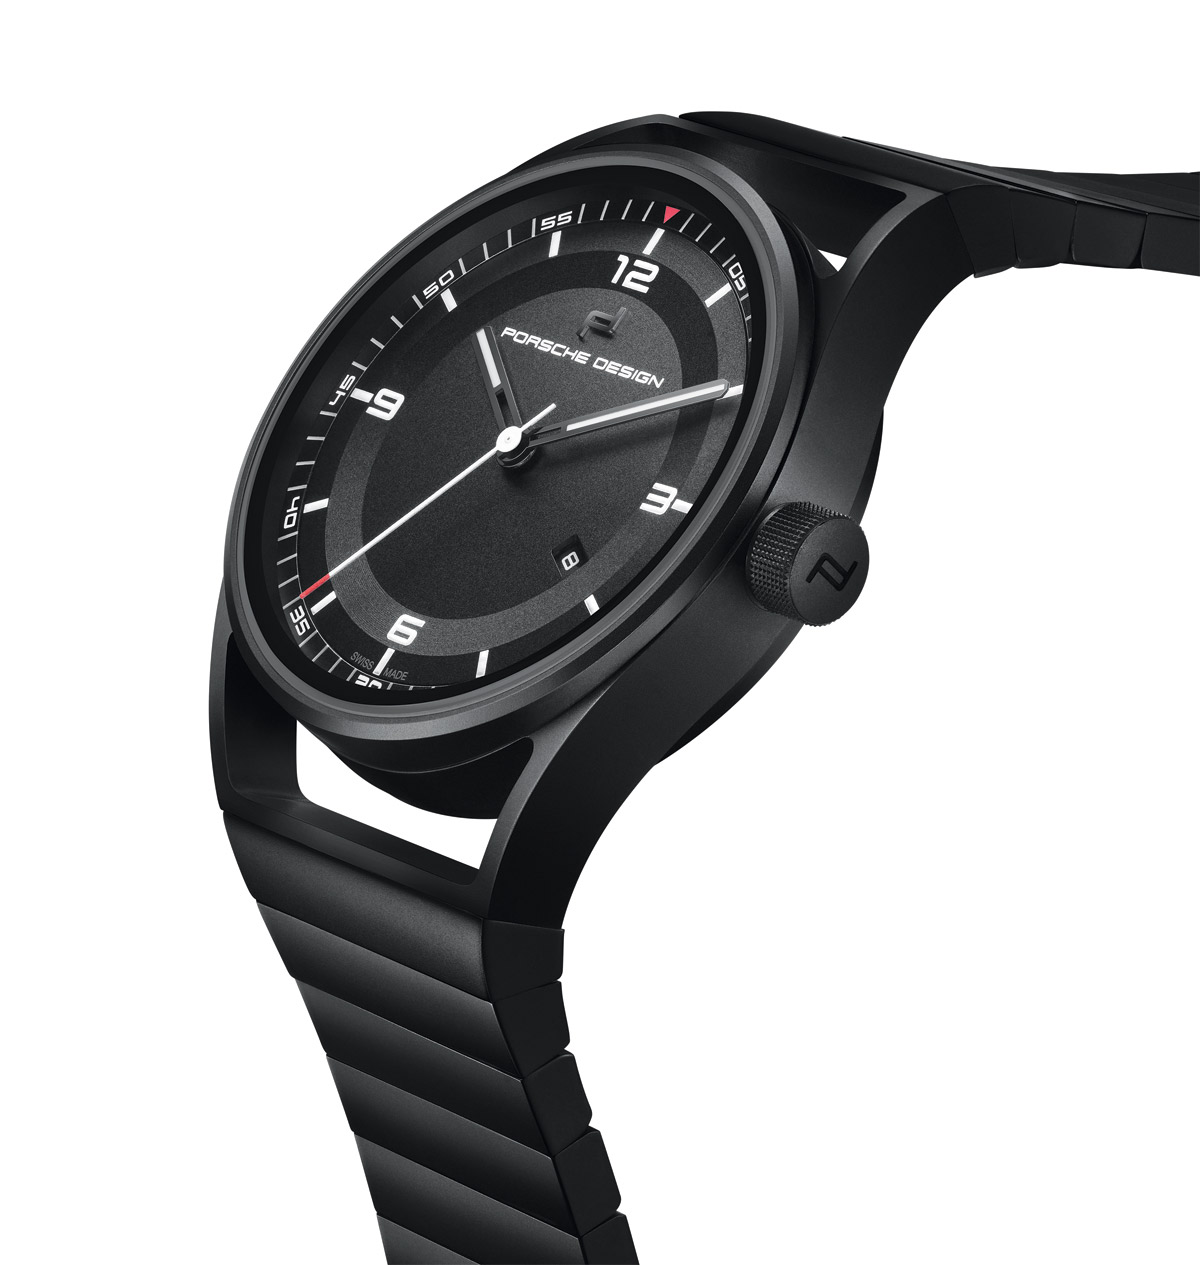 Porsche Design - 1919 Collection | Time and Watches | The watch blog